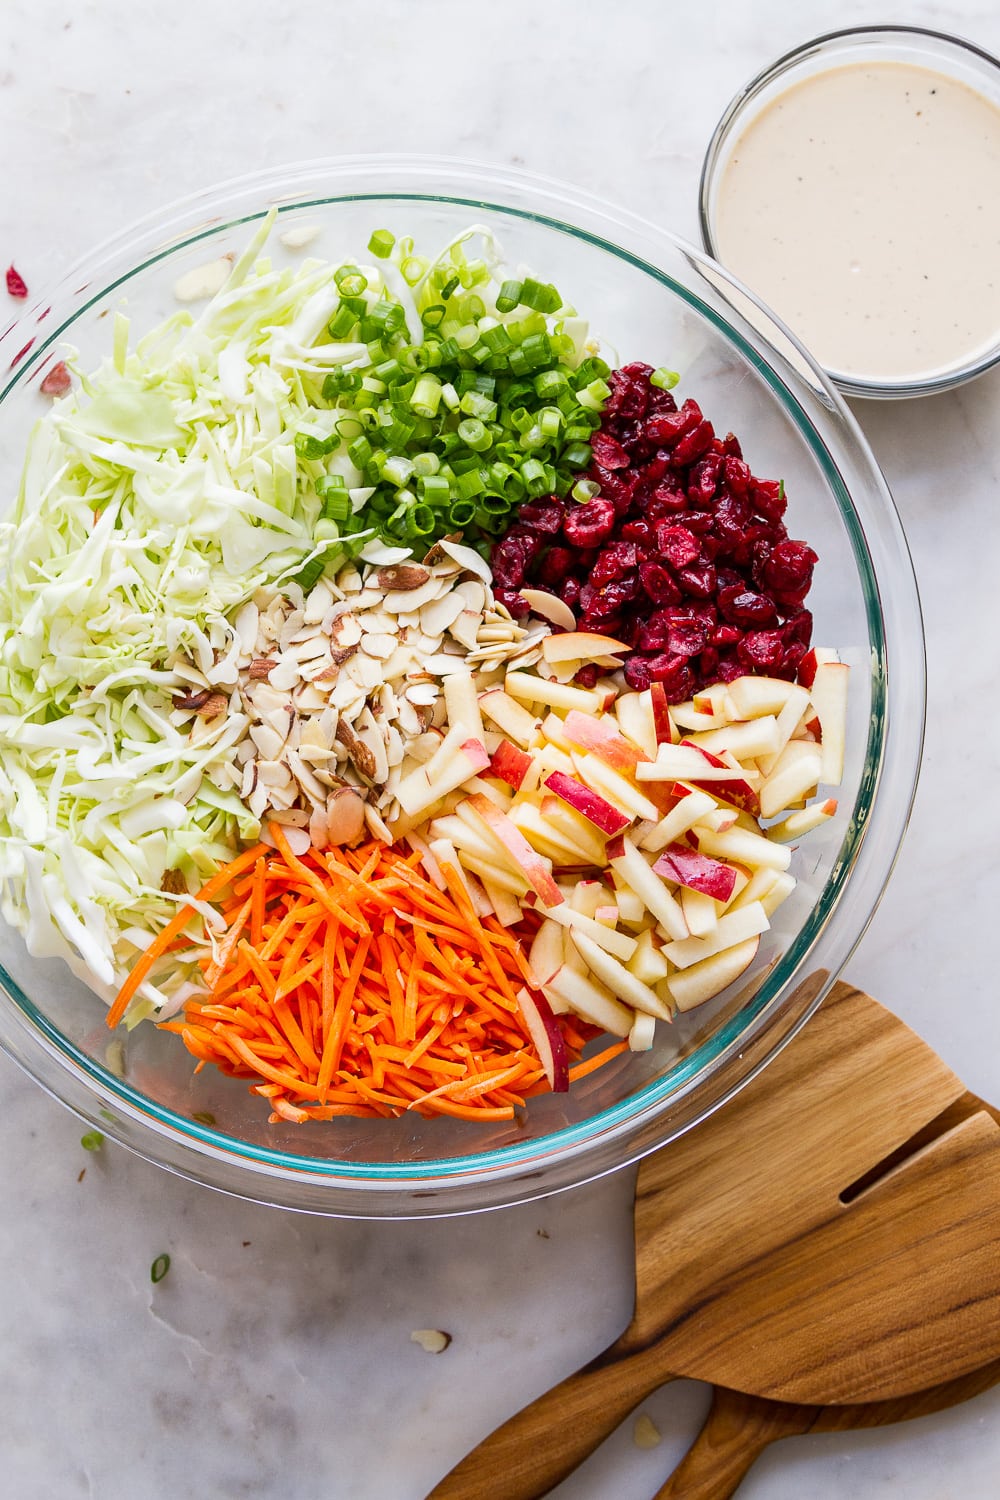 top down view of a large glass mixing with ingredients for apple coleslaw with dressing in a small bowl nearby.